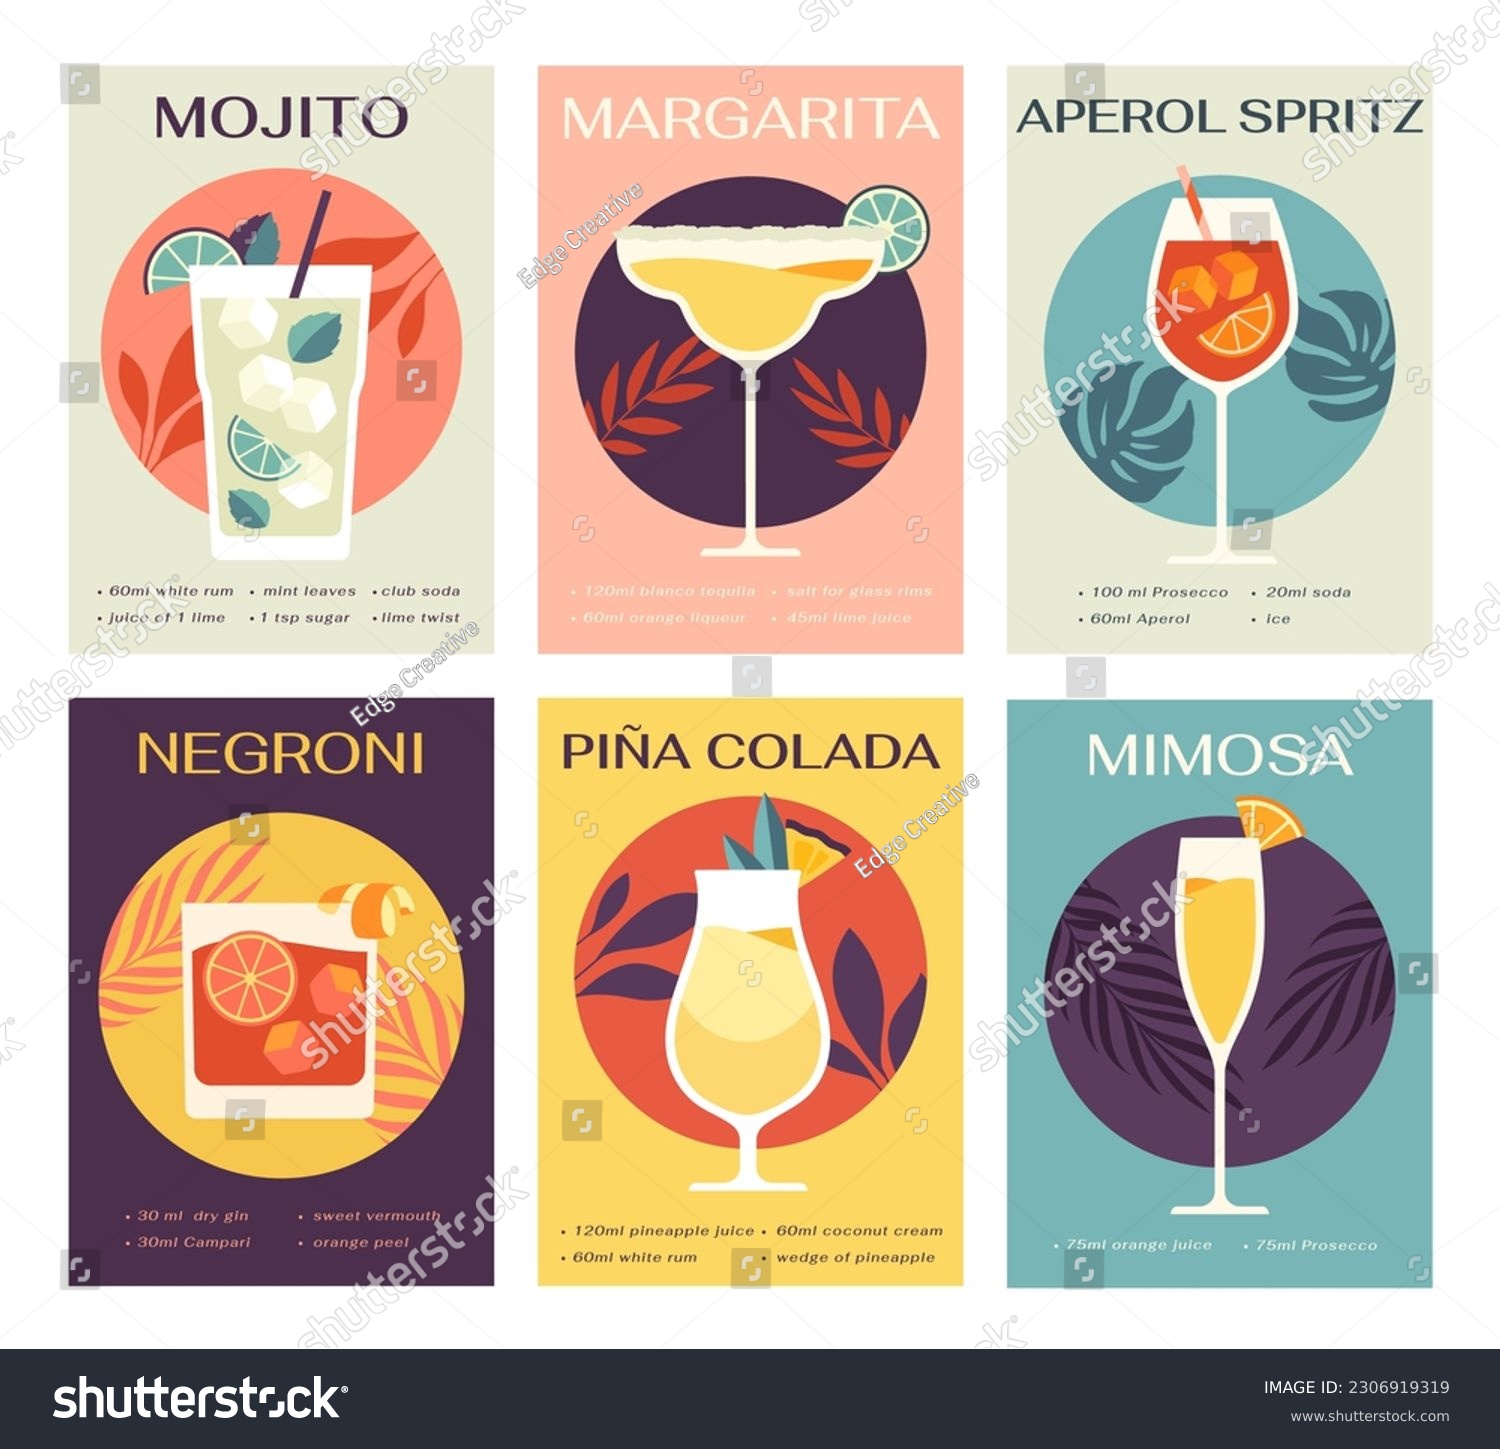 Cocktails posters set. Mojito, margarita, pina colada, mimosa, negroni and aperol spritz. Collection of summer refreshing drinks with ice. Cartoon flat vector illustrations isolated on background #2306919319